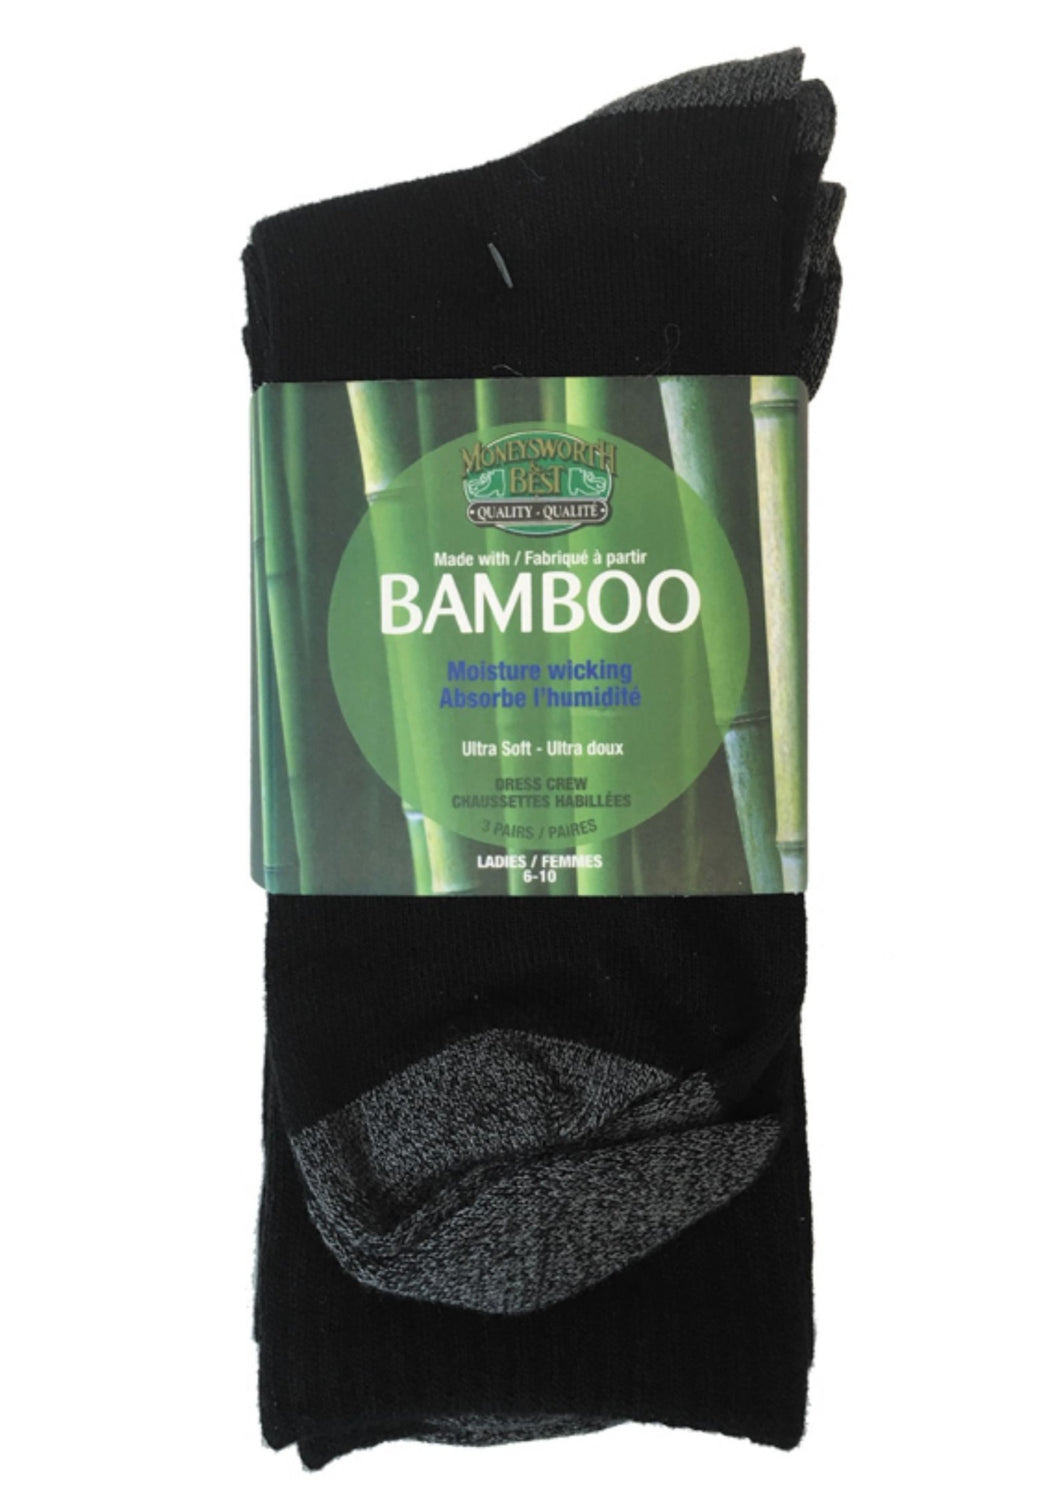 Bamboo socks are ultra soft and keep feet fresh and dry year round, cool in the summer and warm in the winter. Superior moisture absorption and breathable, antibacterial and non-allergenic. Fits Most(Women's 6-10) Fabrication: 80% Rayon from Bamboo, 17% Polyester, 3% Elasthanne Moneysworth & Best $15.00